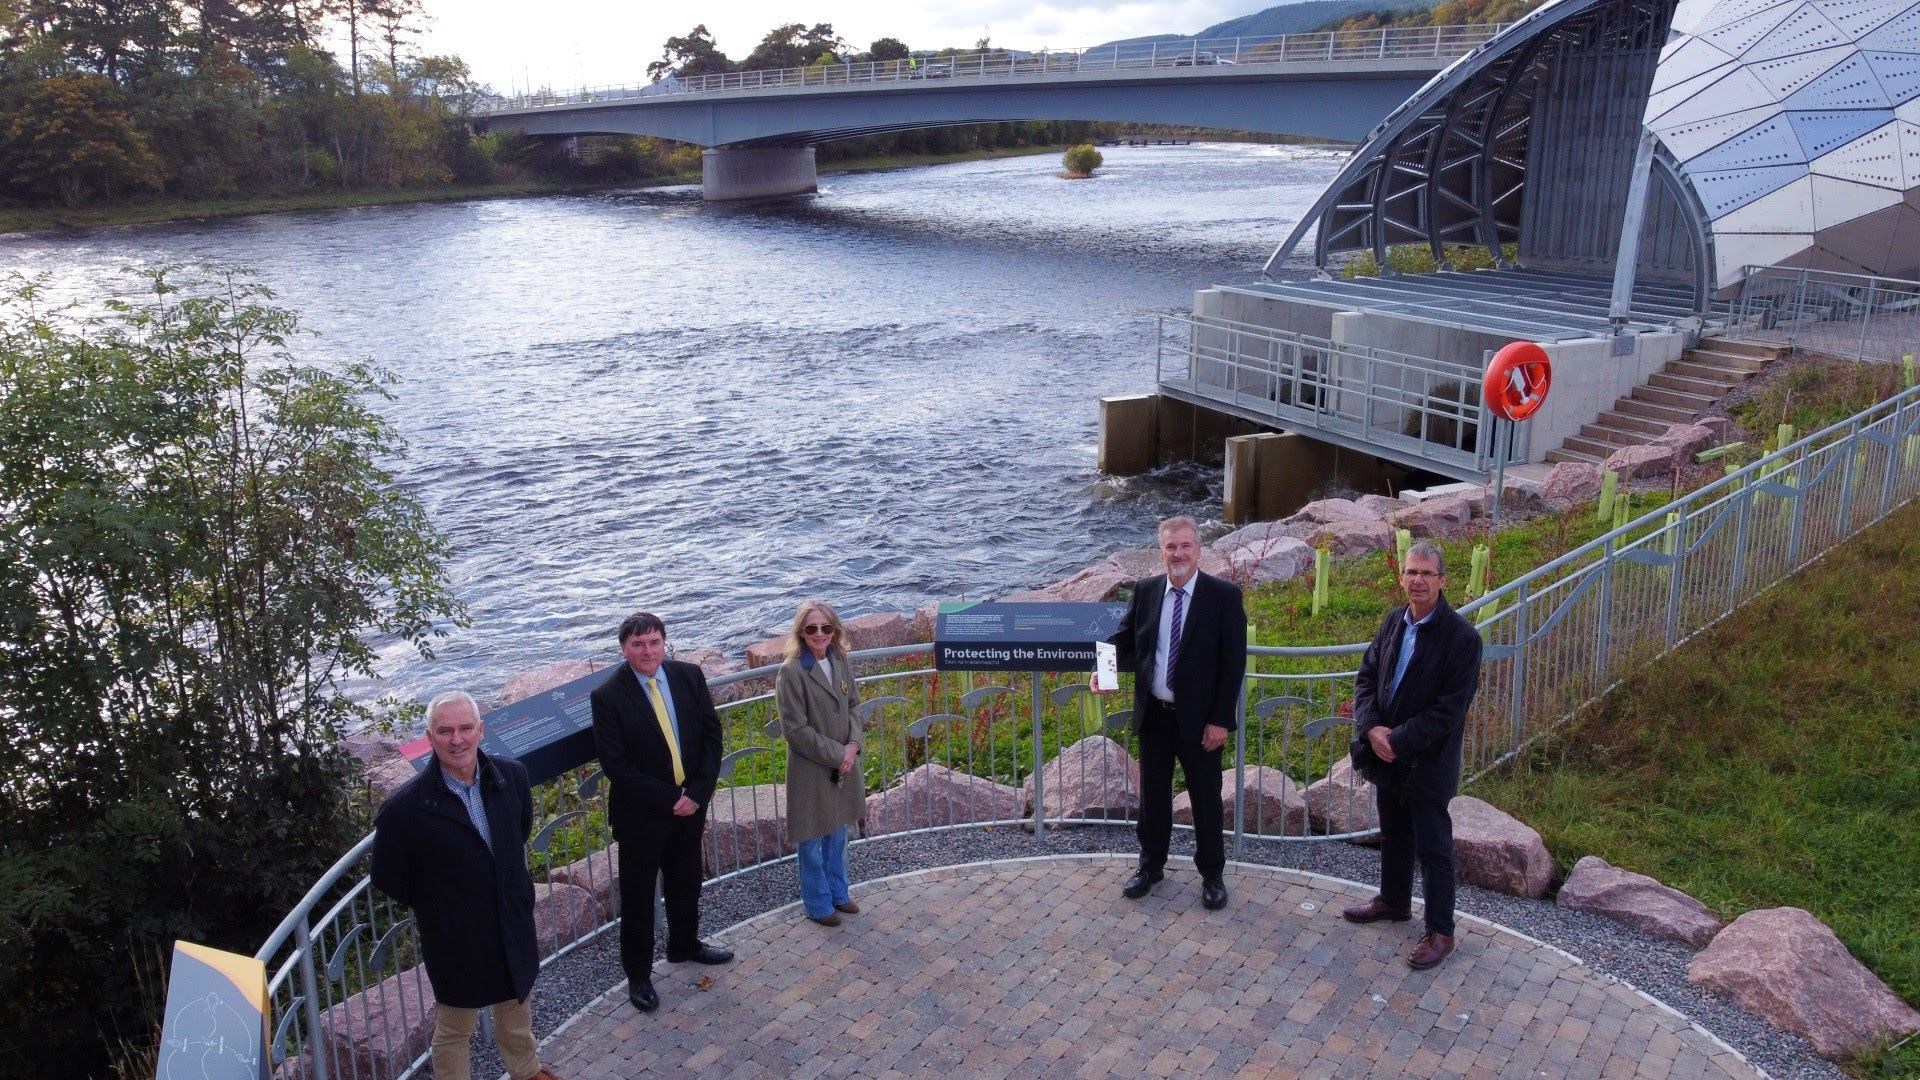 Chair of Highland Council's Climate Change Committee, Cllr Karl Rosie, Chair of Highland Council's Economy & Infrastructure Committee, Cllr Ken Gowans, Provost of Inverness, Cllr Glynis Sinclair, Hydro Ness Project Manager Allan Henderson and Les Hutt of Leslie Hutt Architects.